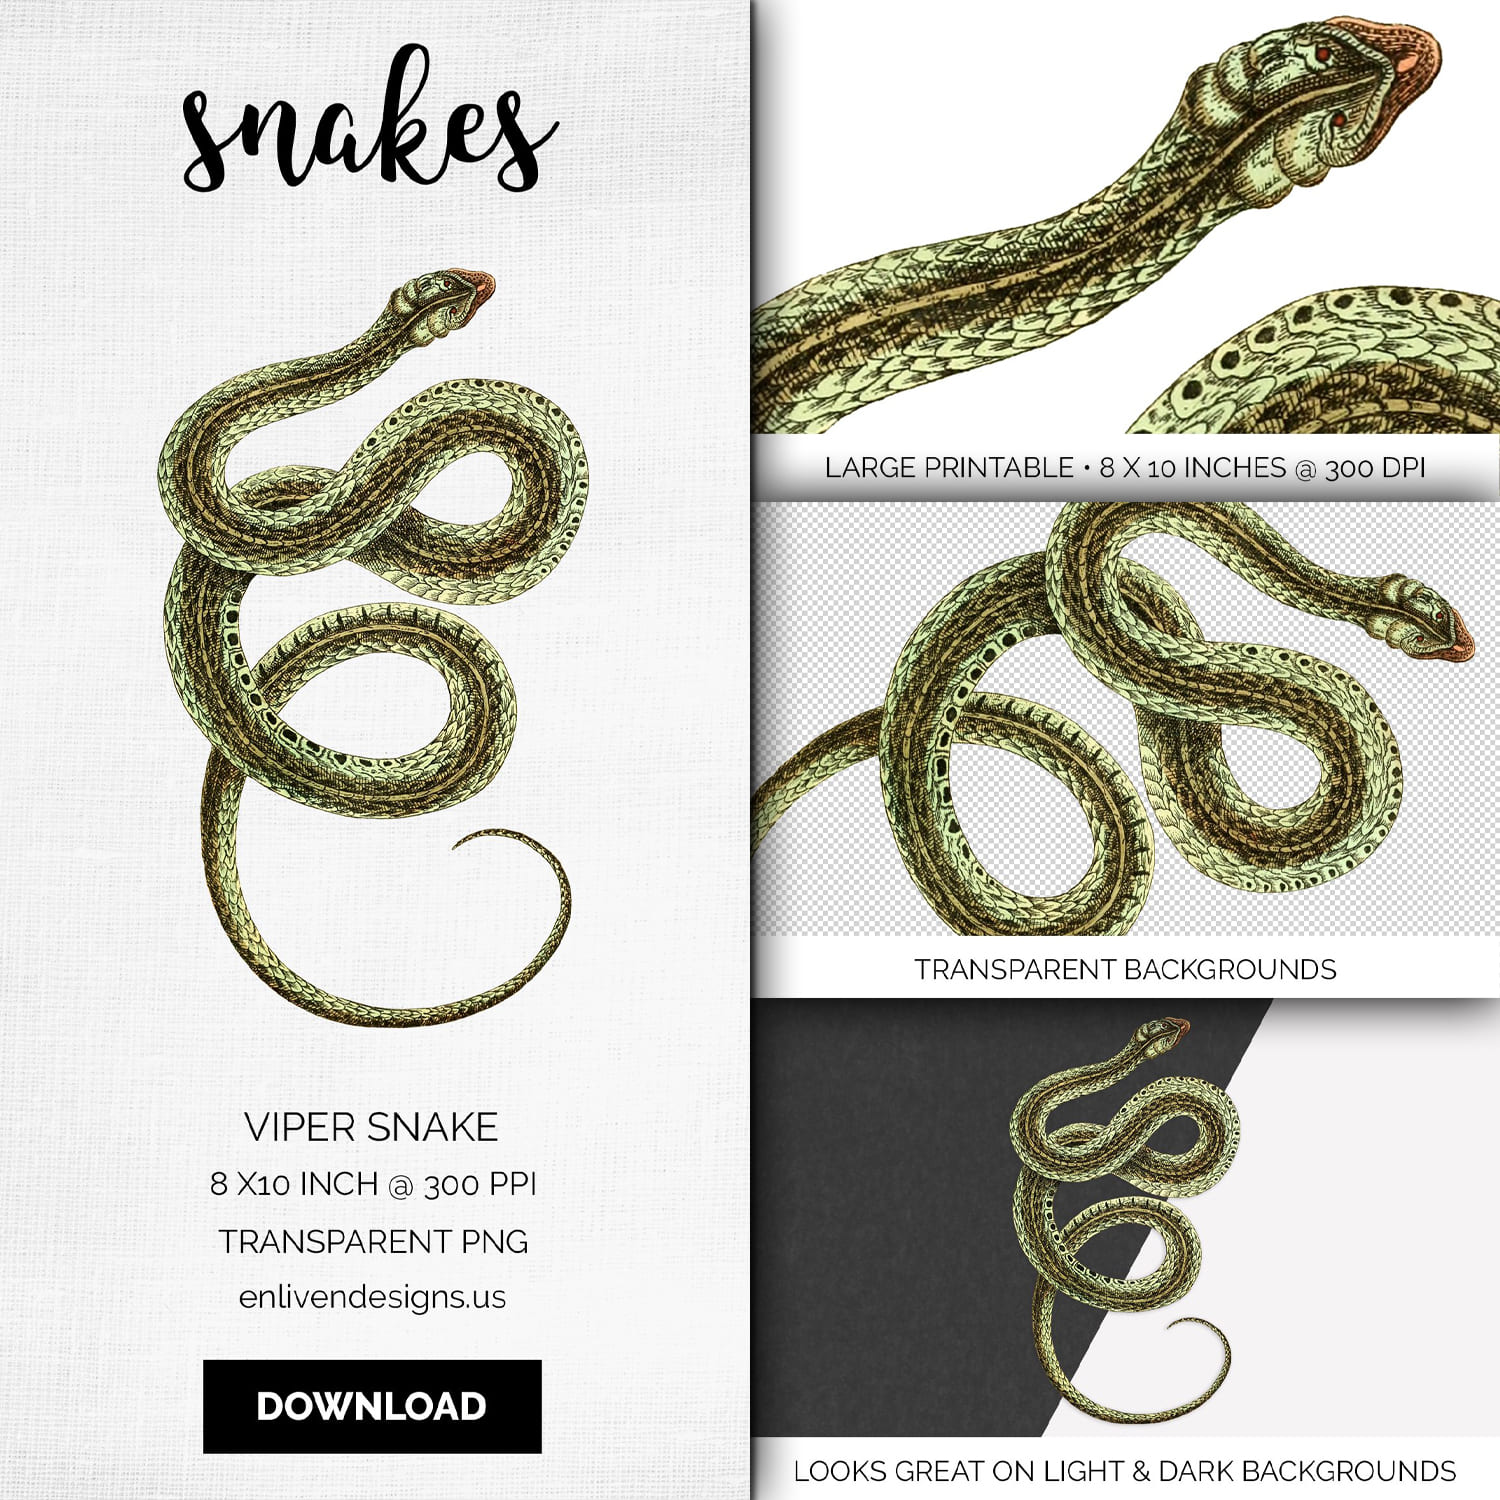 Colorful set of images with viper snake.